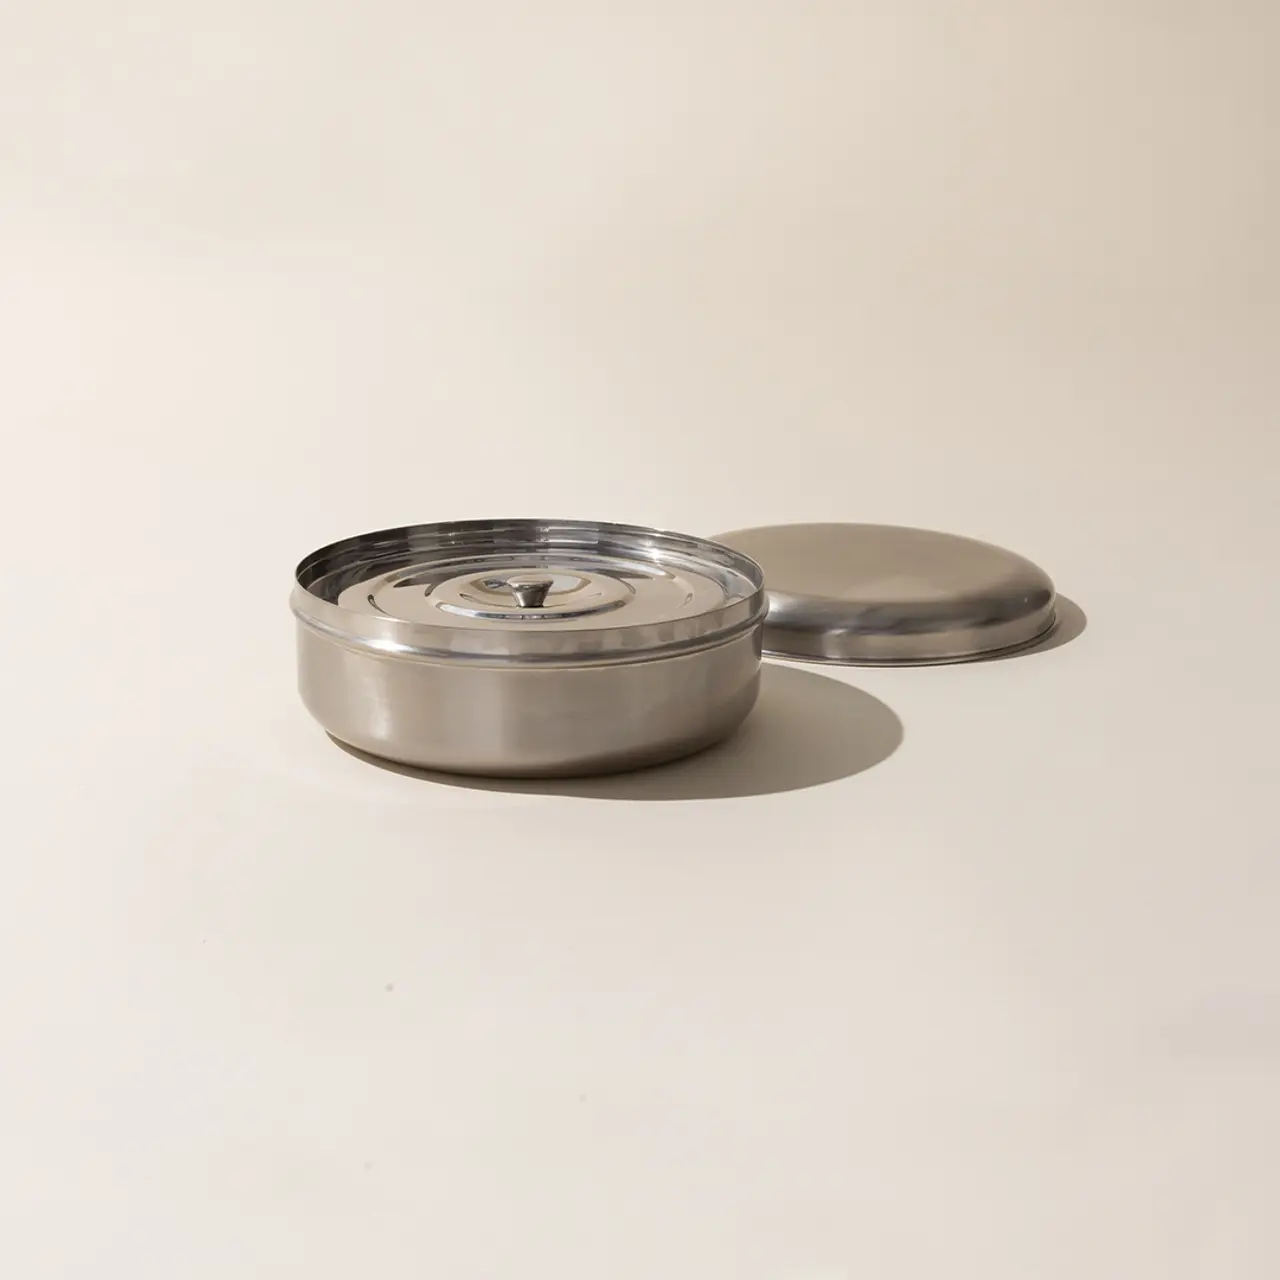 A stainless steel container with a rotating cover sits against a neutral background.